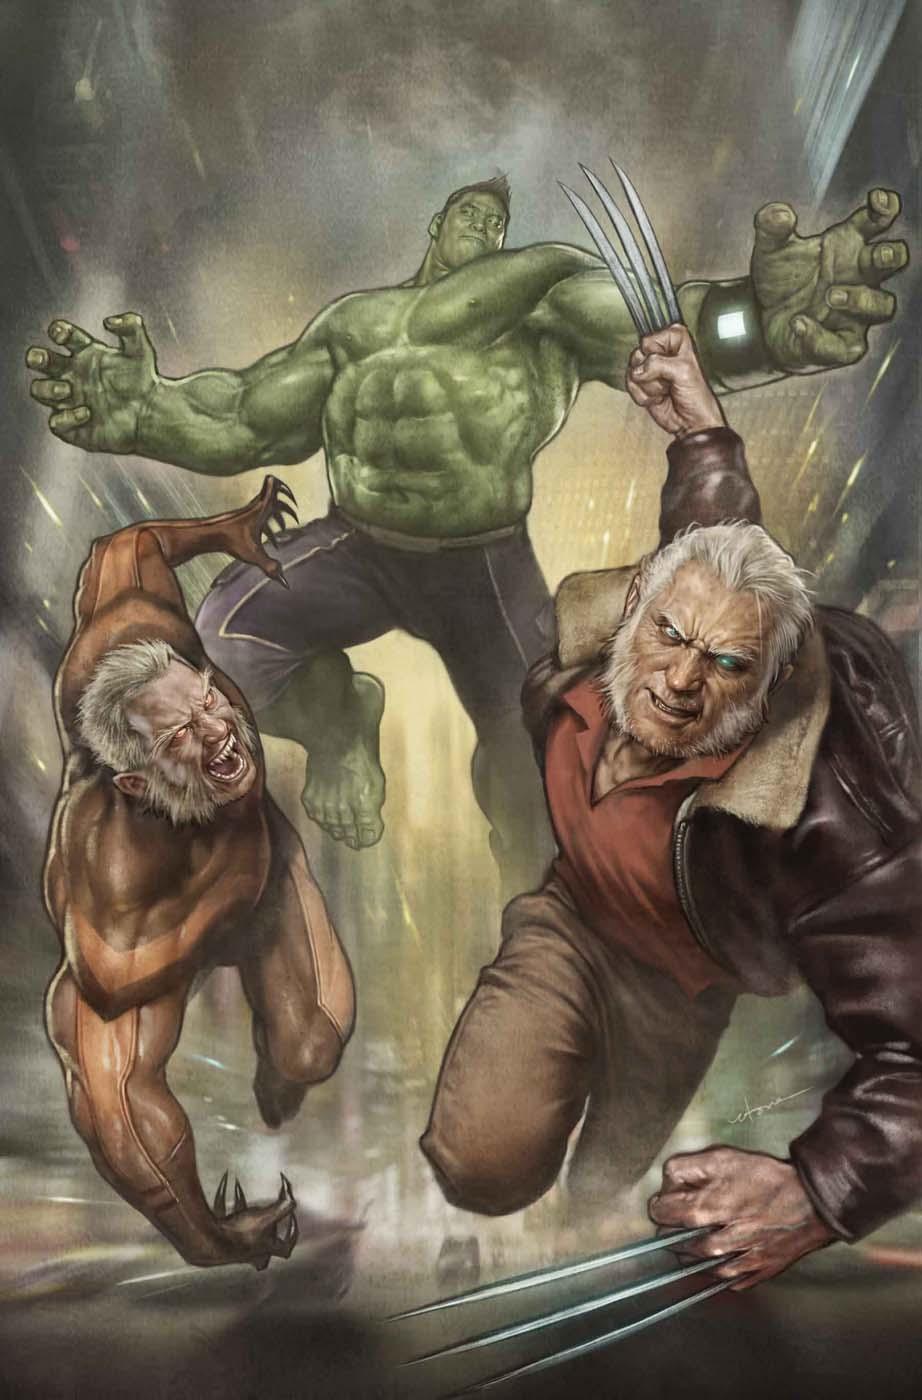 Totally Awesome Hulk Vol. 1 #19